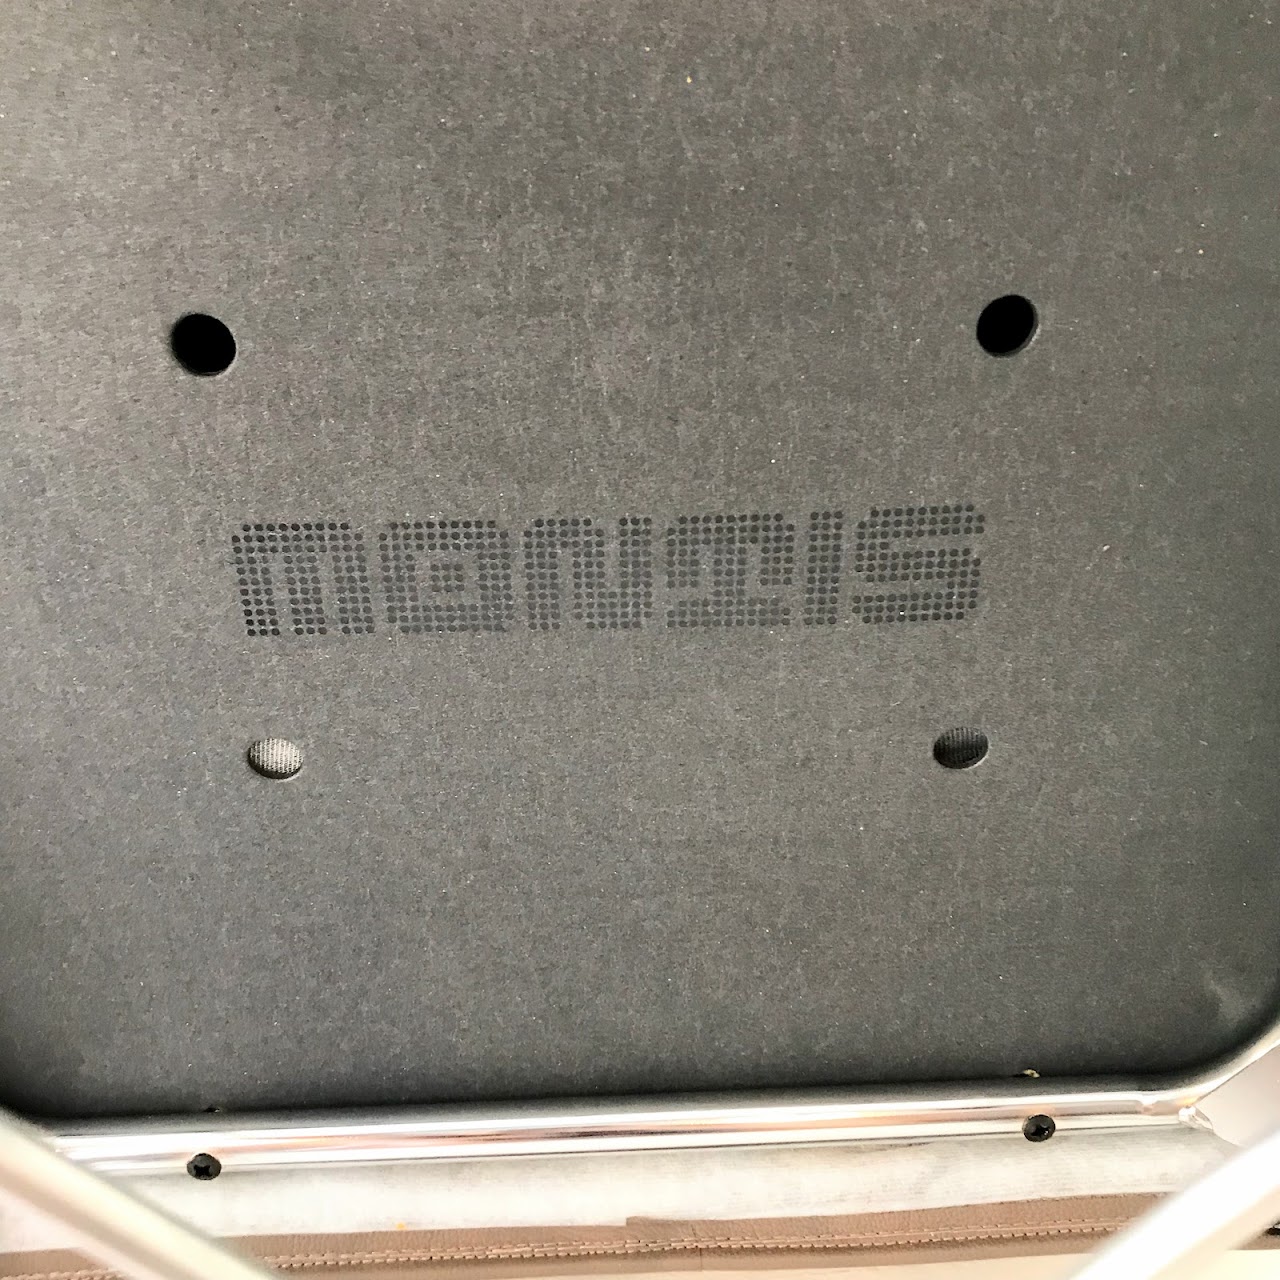 Montis Charly Lounge Chair